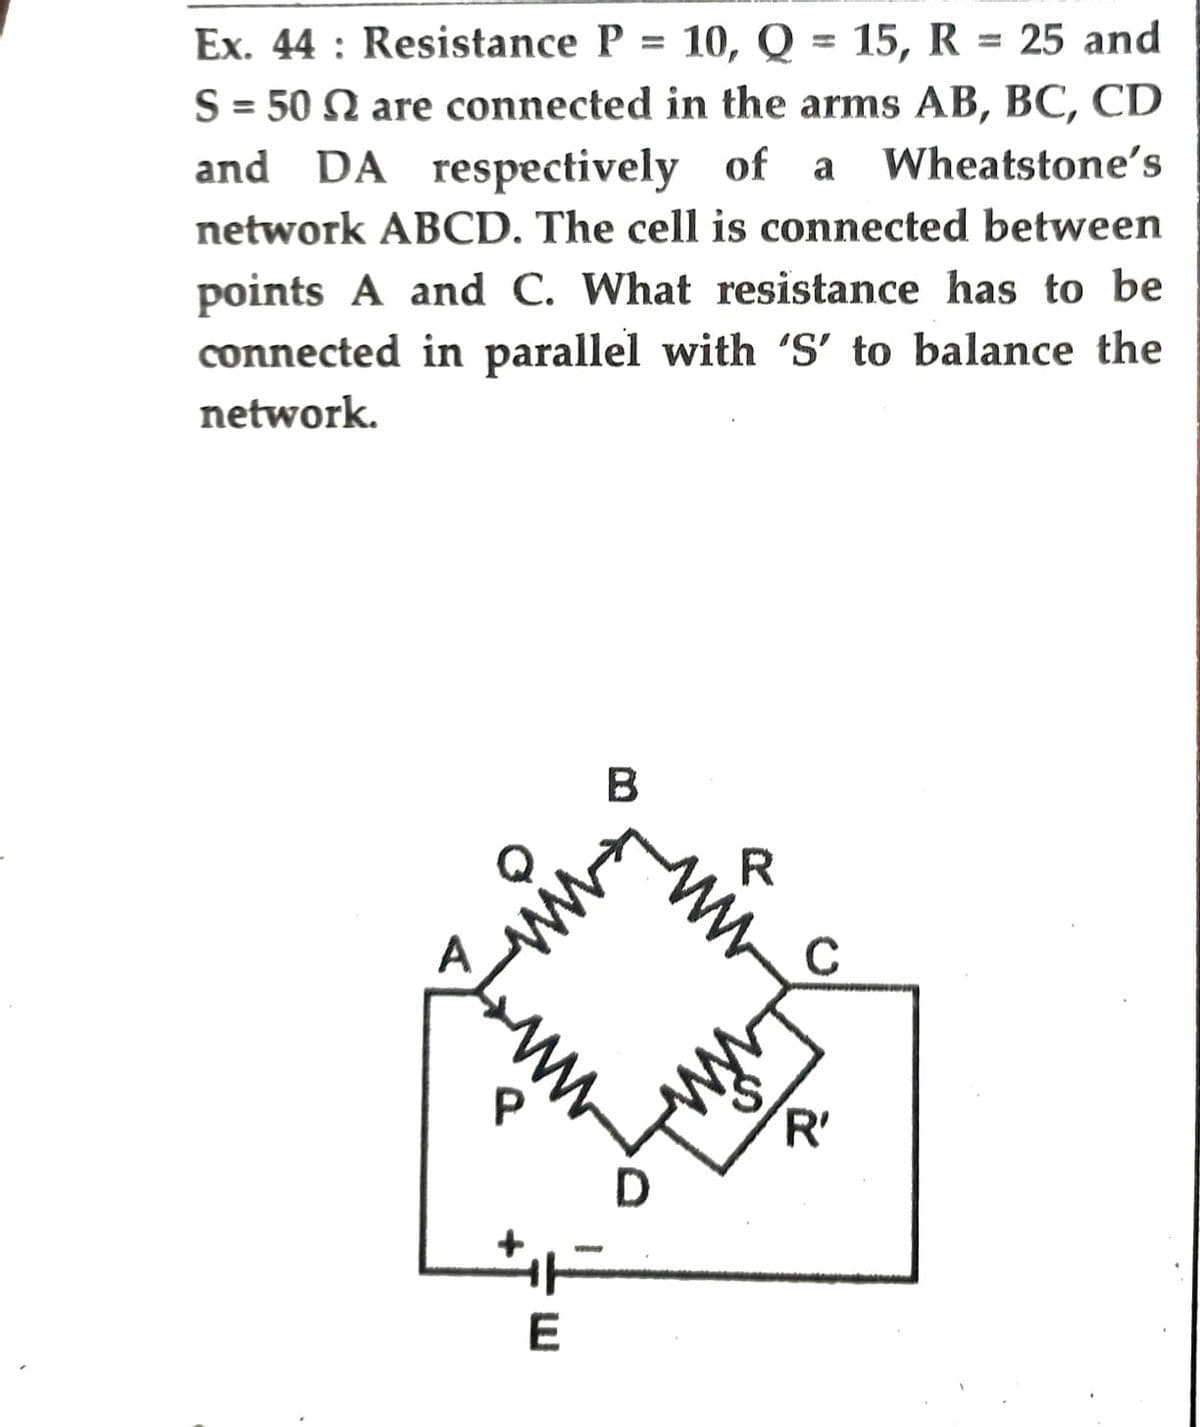 Ex. 44: Resistance P = 10, Q = 15, R = 25 and
S = 50 2 are connected in the arms AB, BC, CD
and DA respectively of a Wheatstone's
network ABCD. The cell is connected between
points A and C. What resistance has to be
connected in parallel with 'S' to balance the
network.
B
P
E
D
R
C
'R'